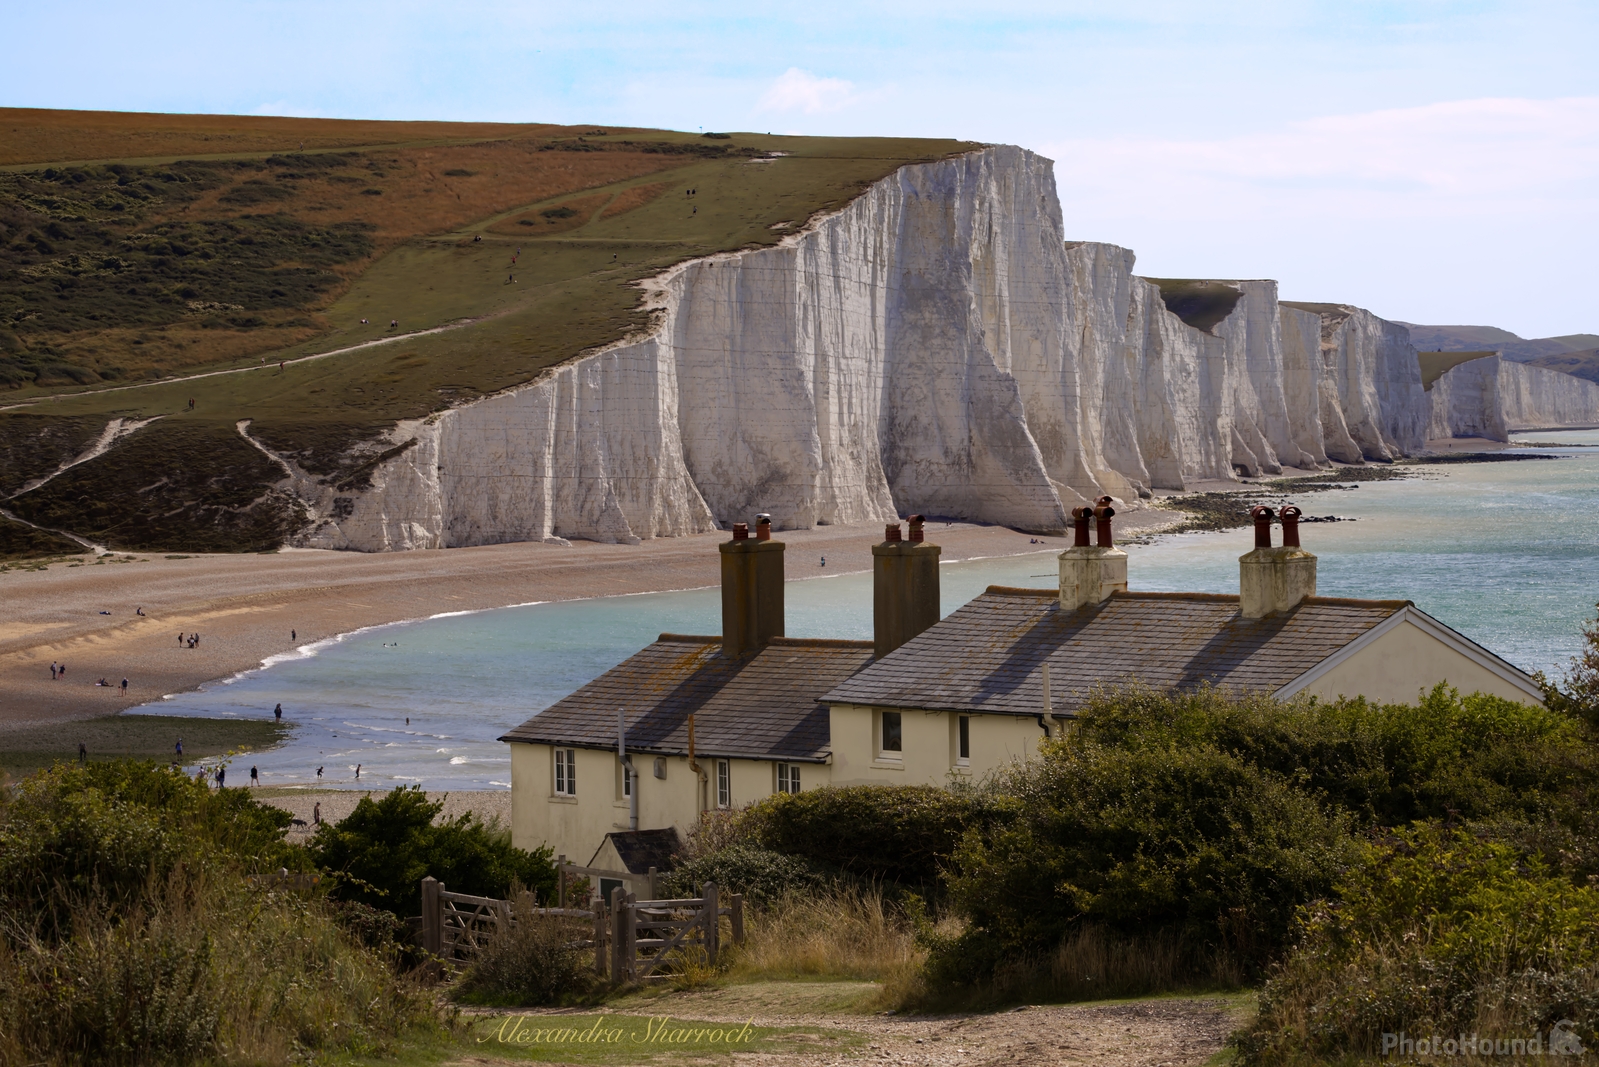 Image of Coastguard Cottages & Seven Sisters by Alexandra Sharrock